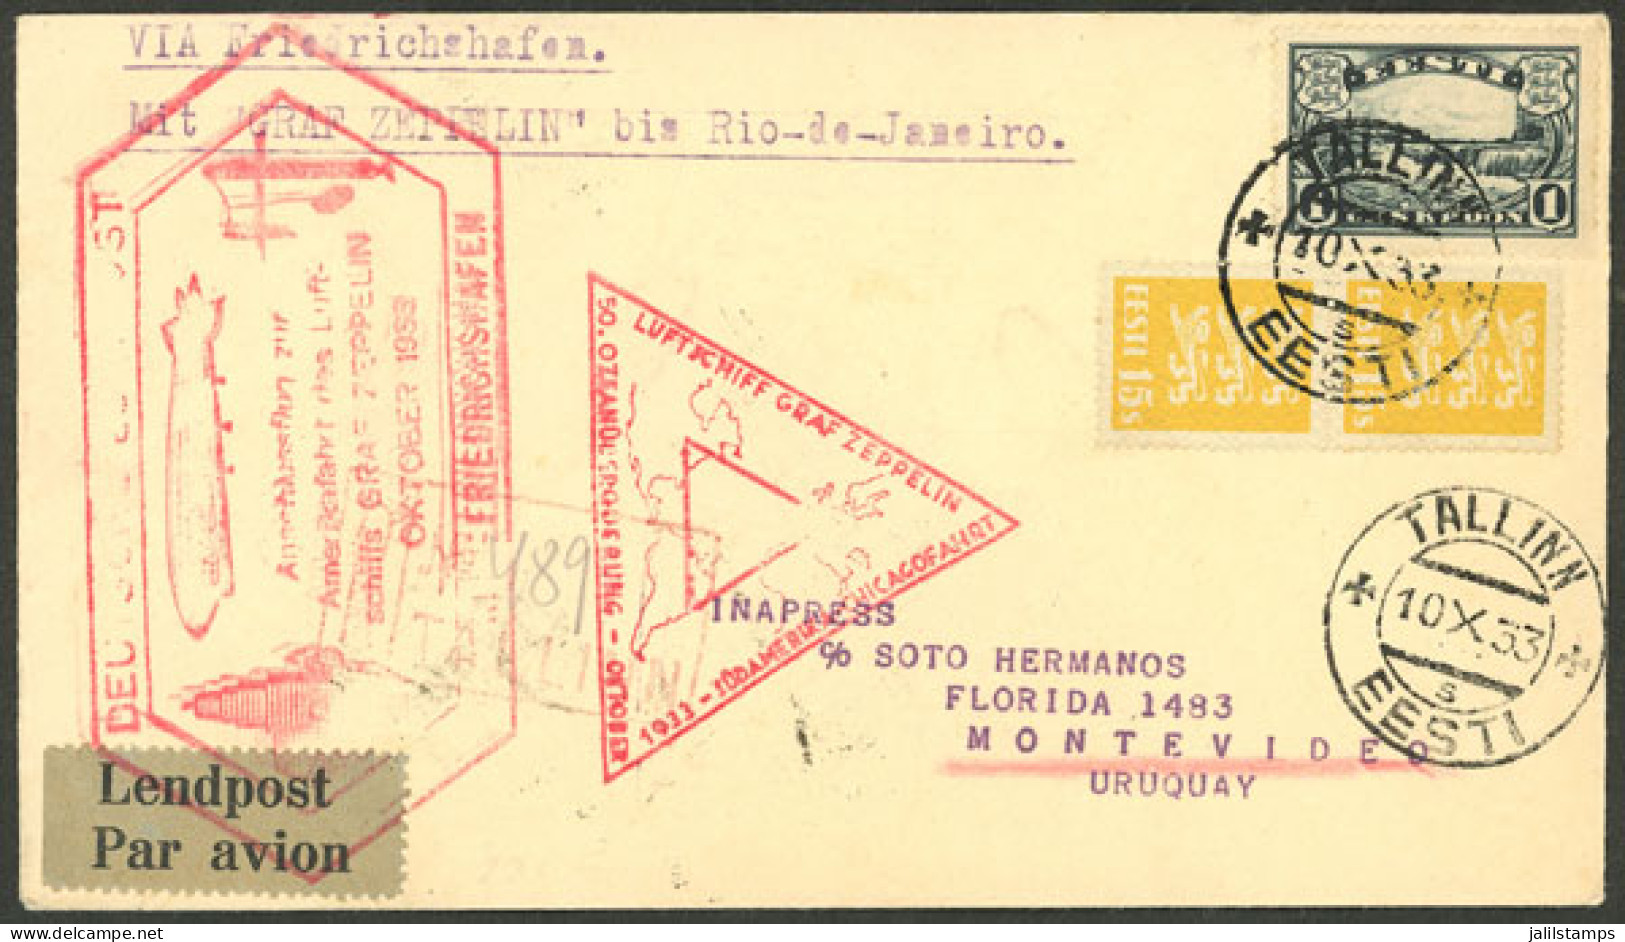 ESTONIA: 10/OC/1933 Tallinn - Uruguay, Airmail Cover Carried By Zeppelin, Special Handstamps, Transit Mark And Montevide - Estonia